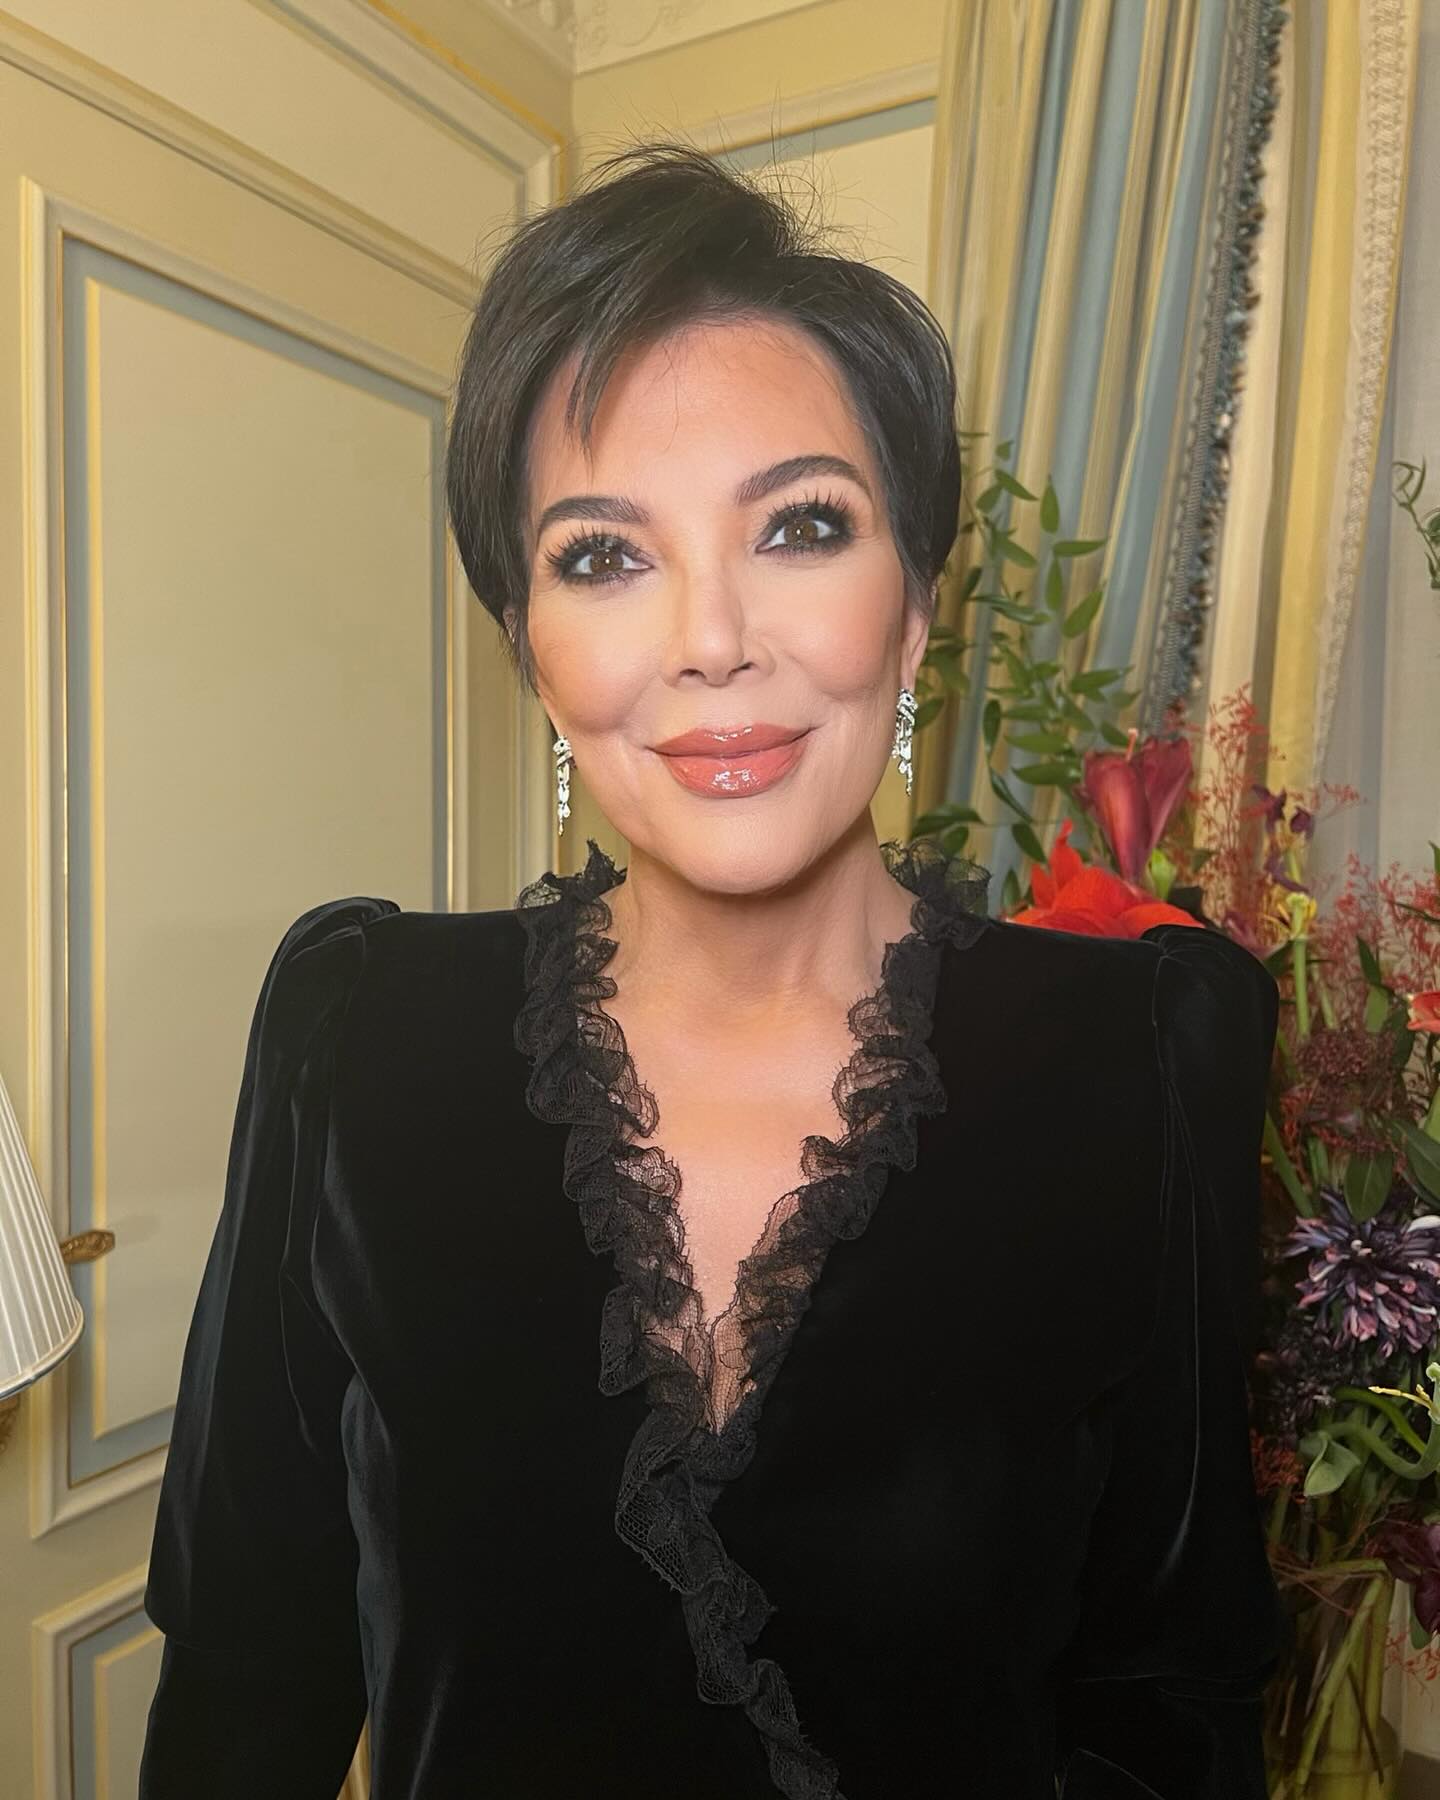 The Kardashians star has been in France in celebration of Paris Fashion Week